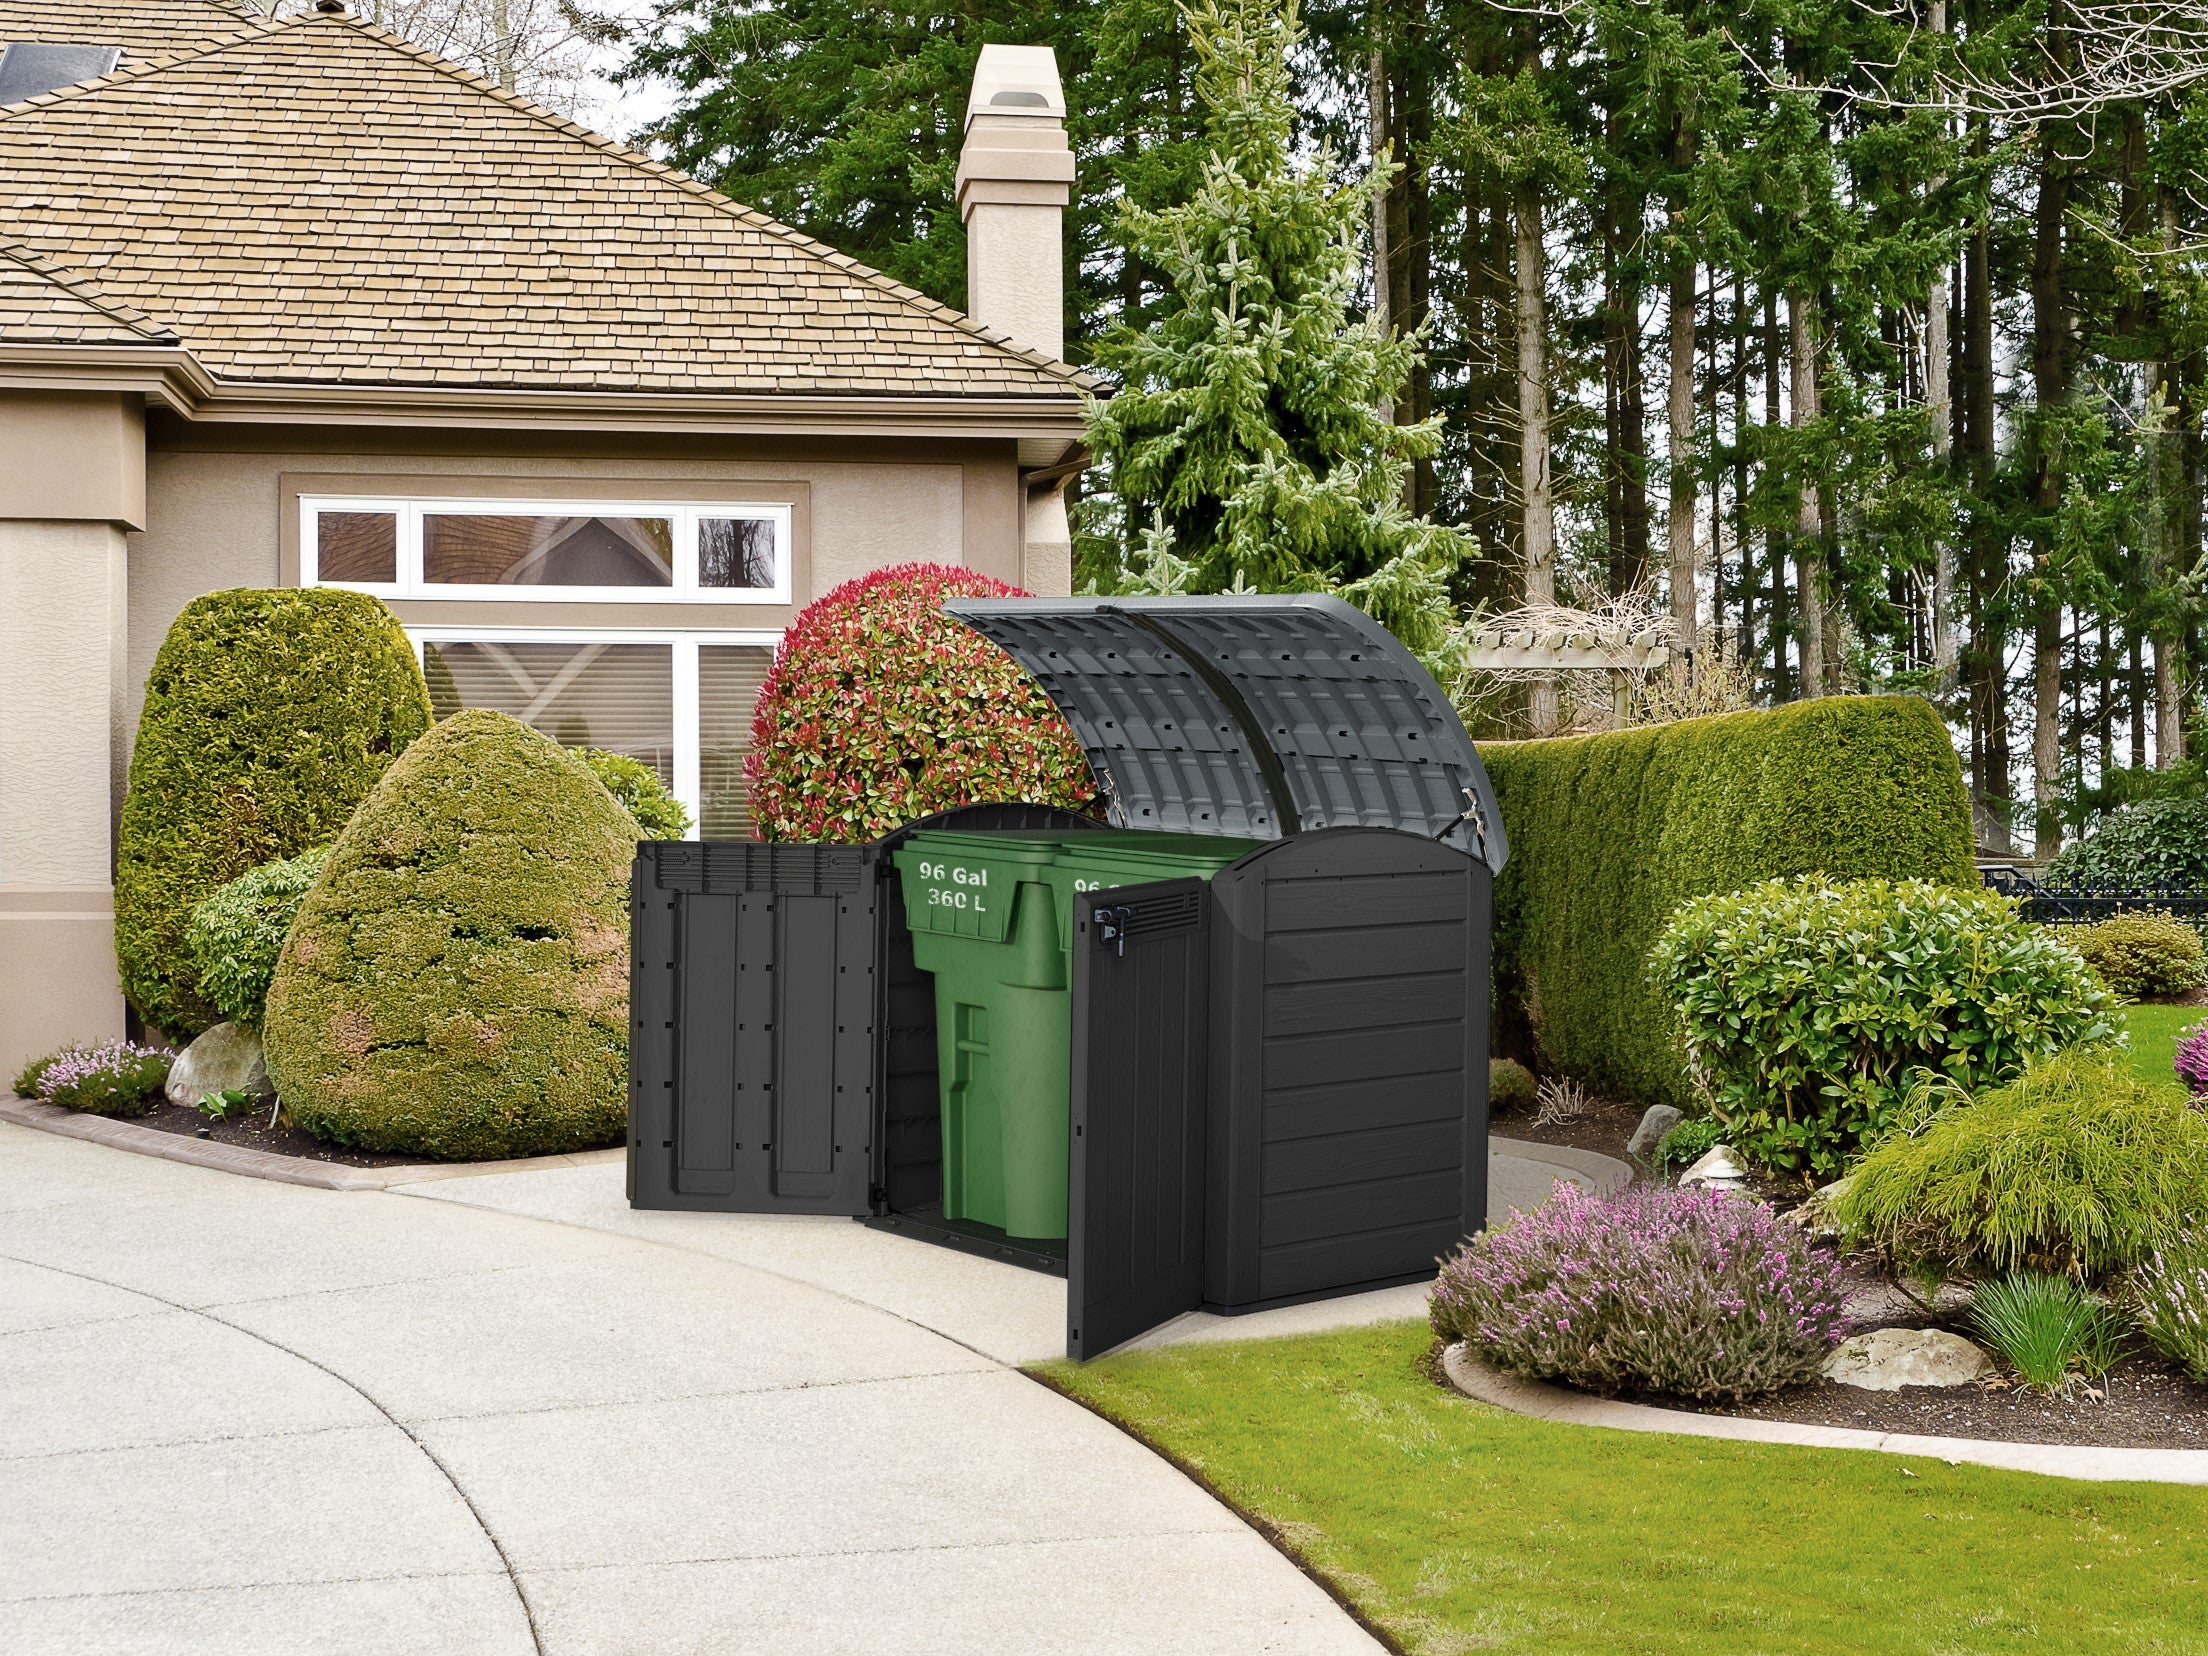 Keter Store it Out Ultra for storing large rubbish bins